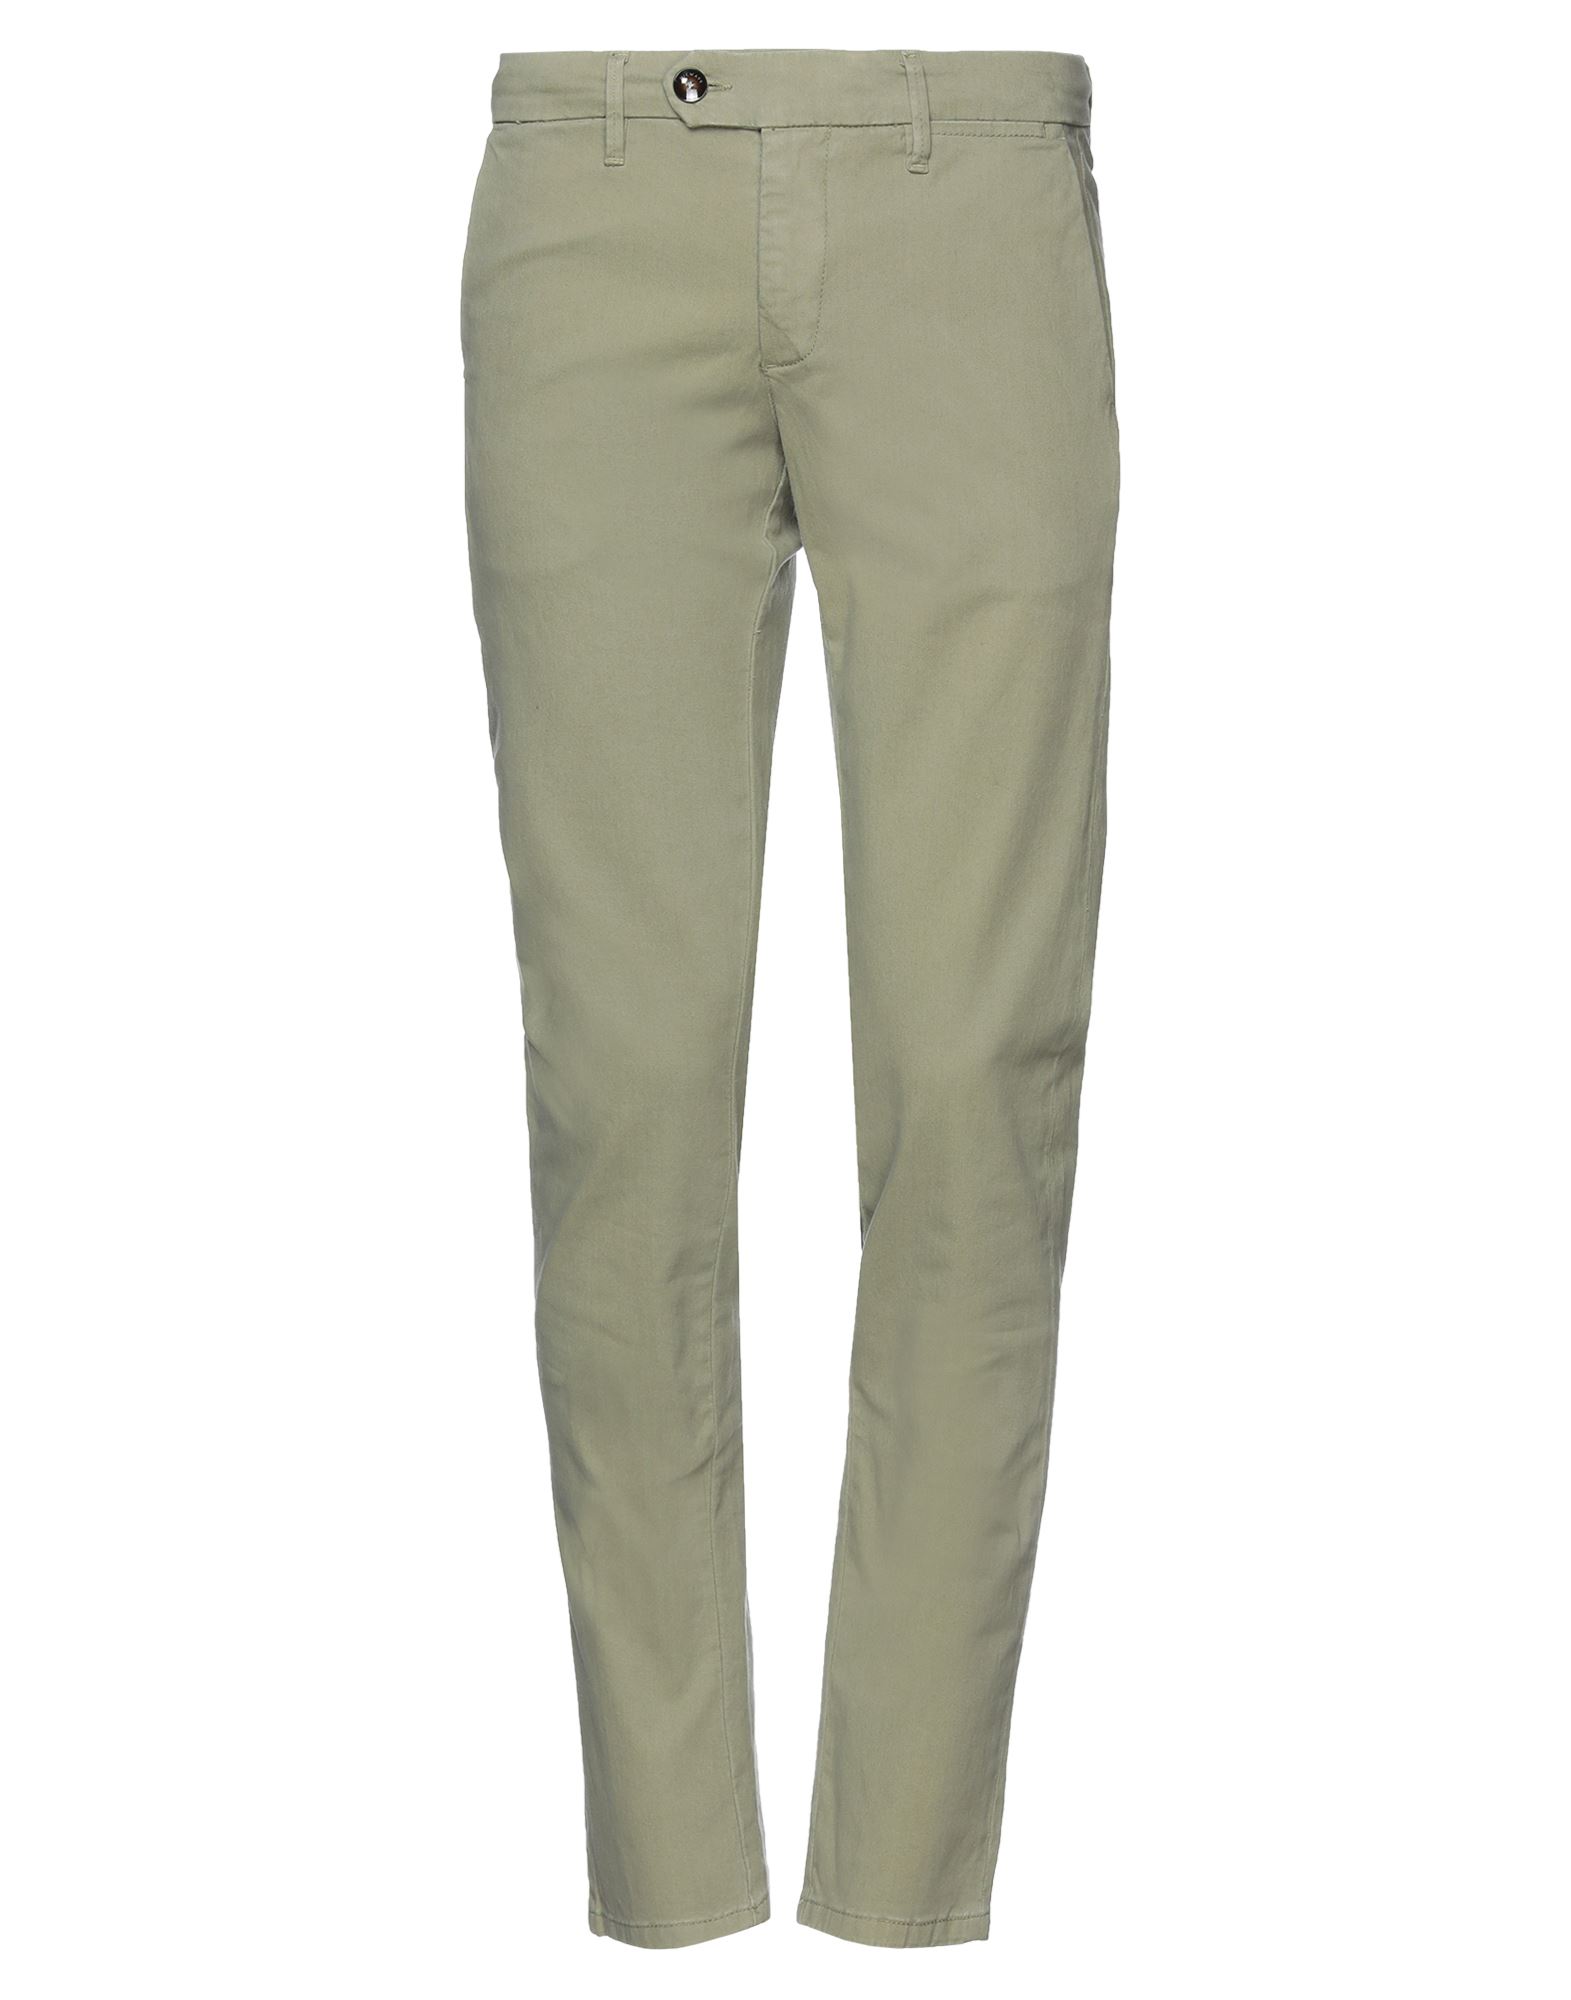 Nicwave Pants In Military Green